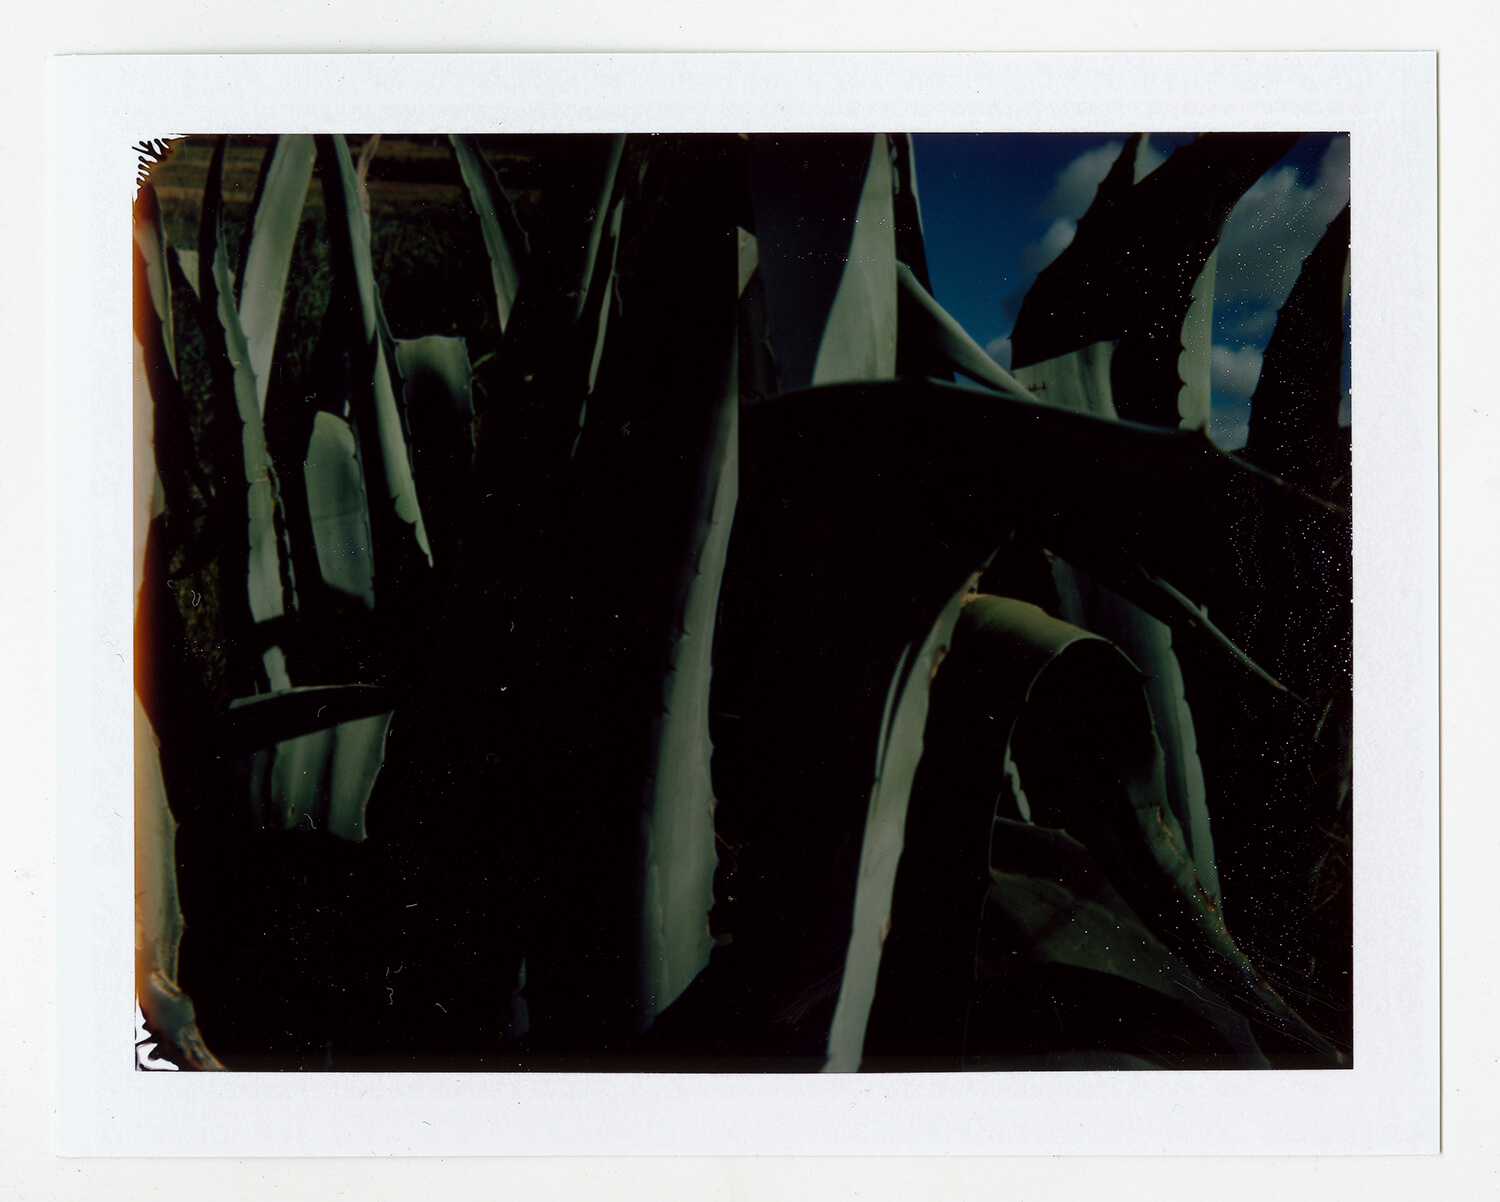  I.D.097, The Polaroid Revolutionary Workers, 2013, Polaroid Picture, 107mm x 86mm 